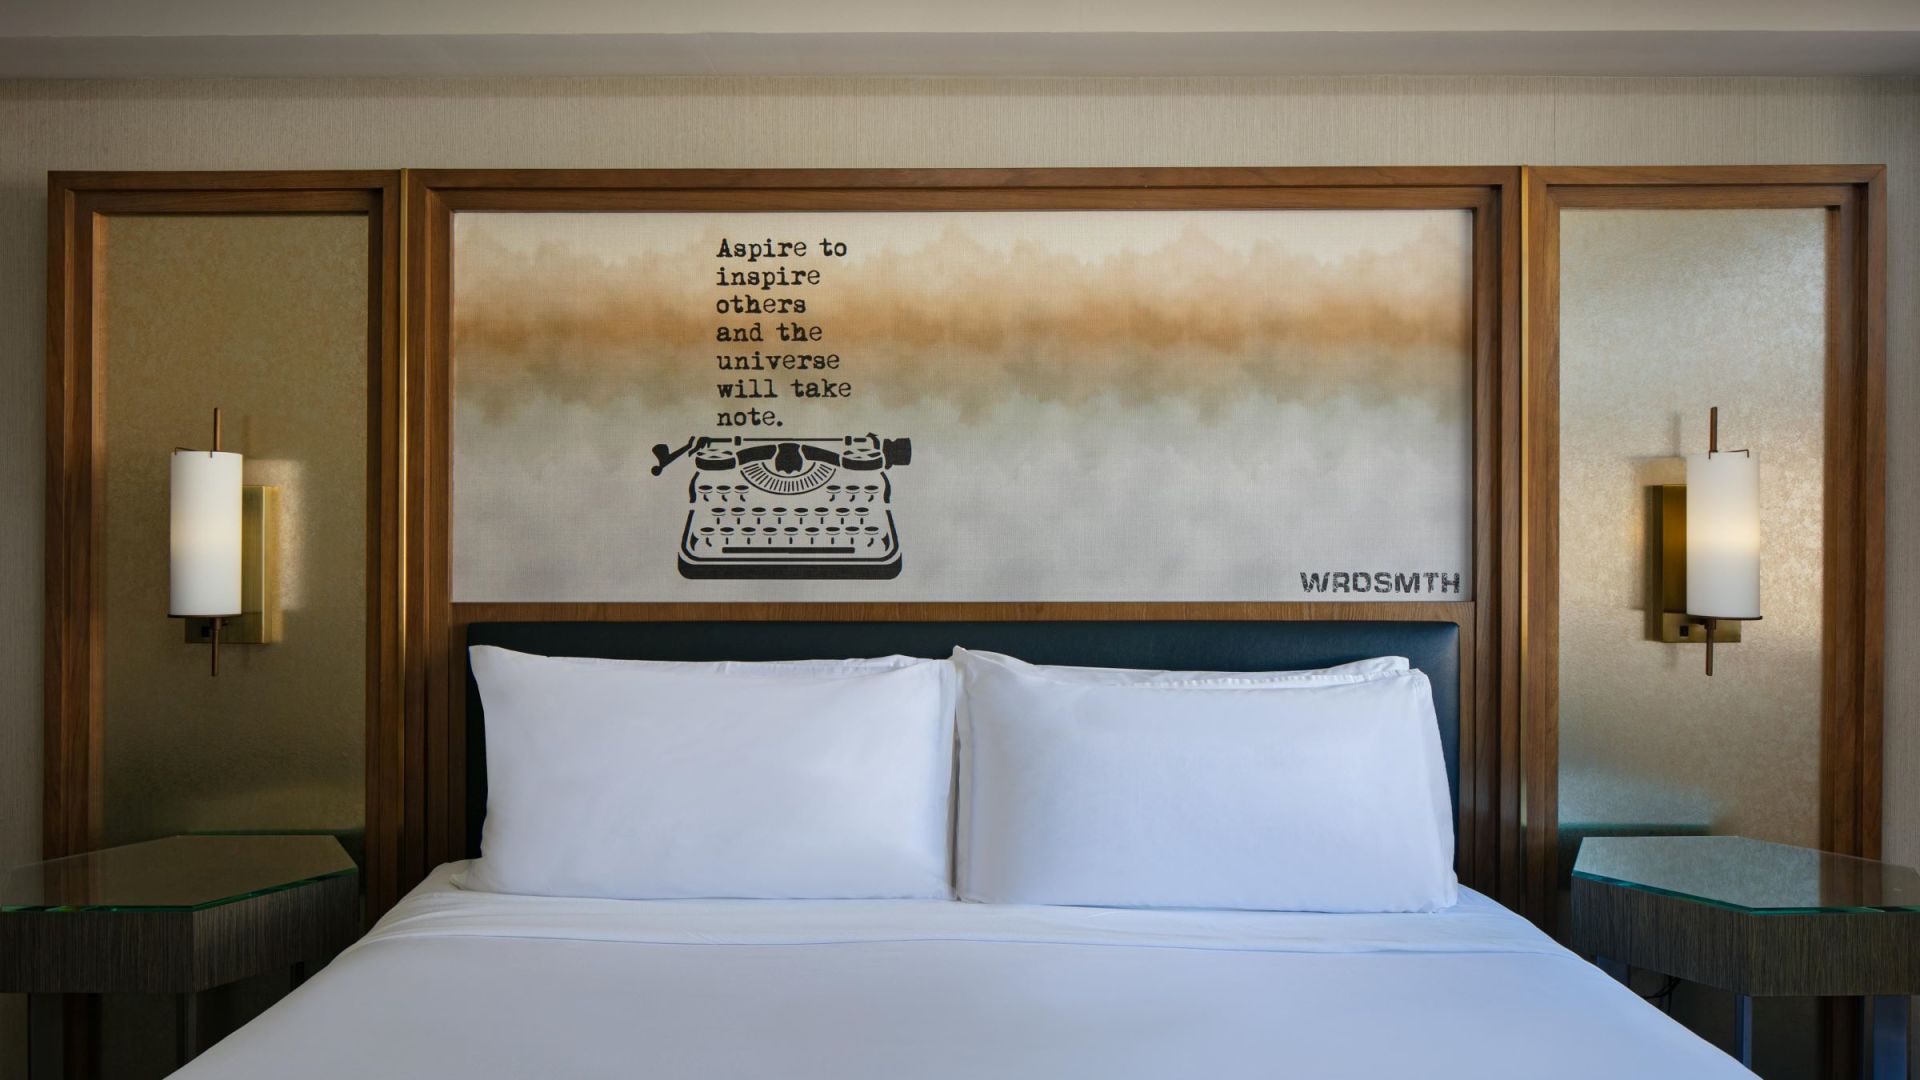 A Bed With A Poster On The Wall